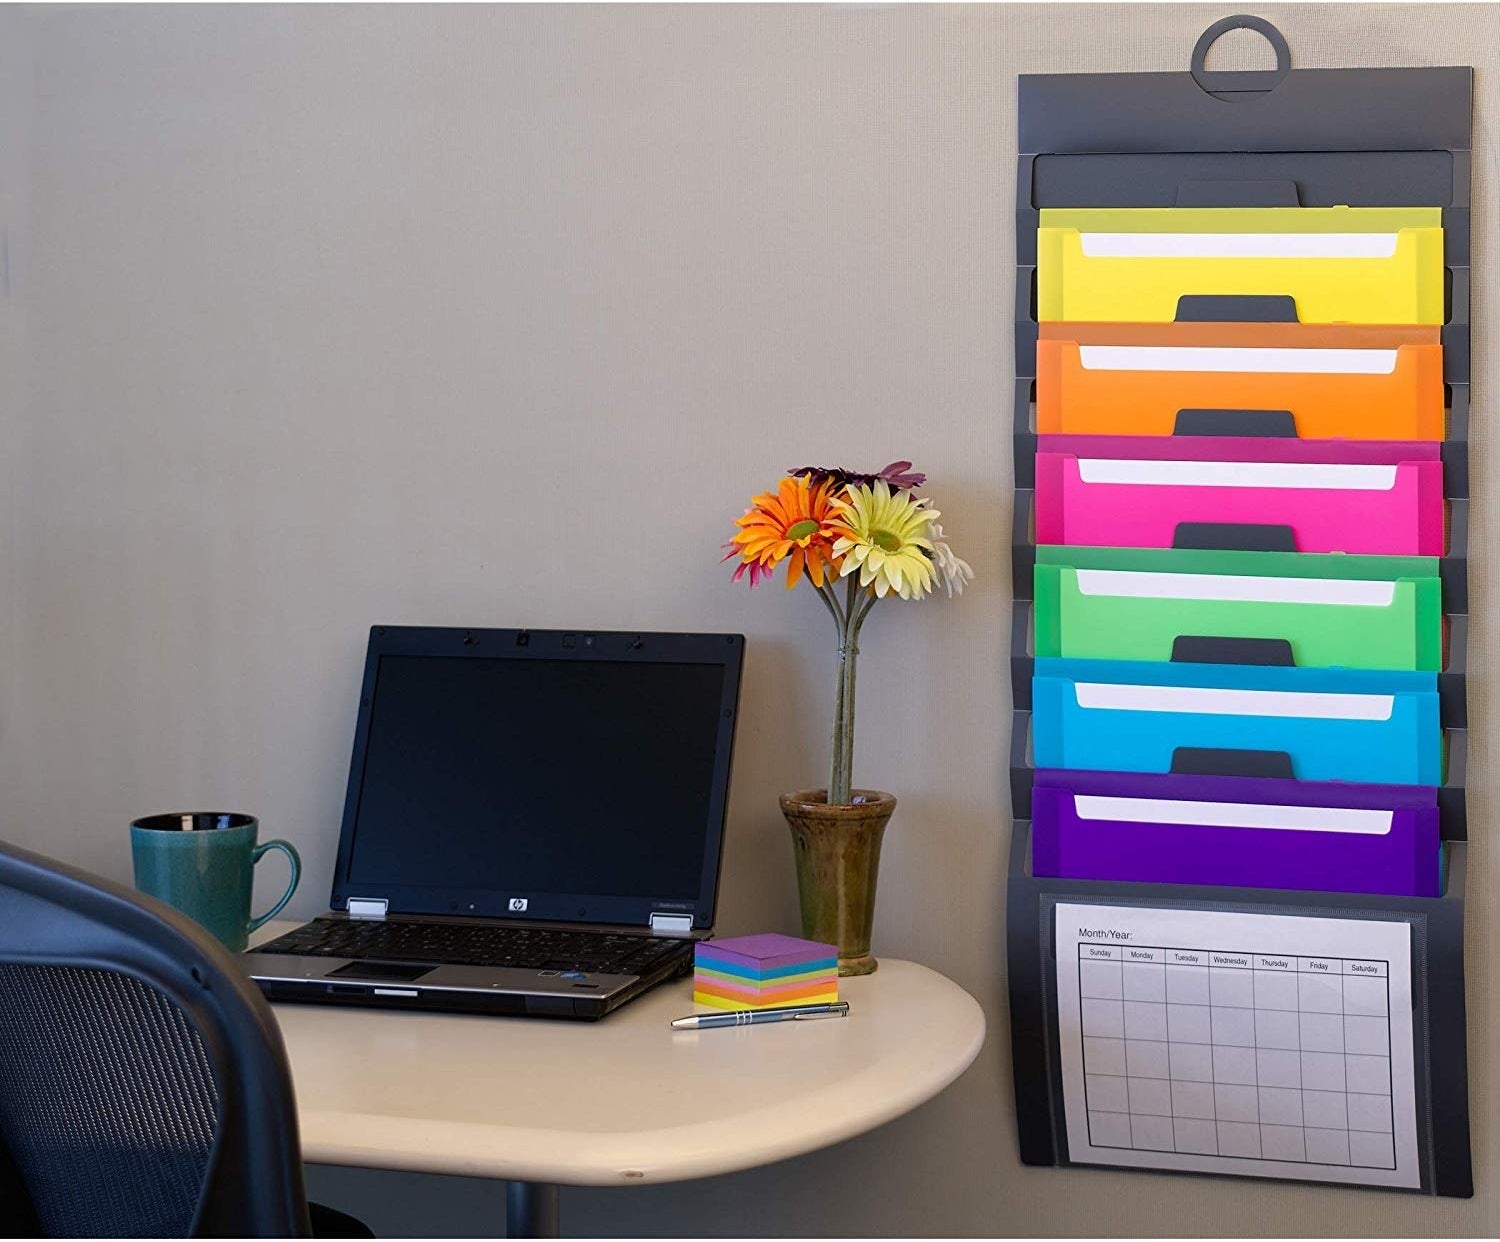 The organizer next to a desk. It lies flat against the wall, with yellow, orange, pink, green, blue, and purple pockets in addition to the clear one